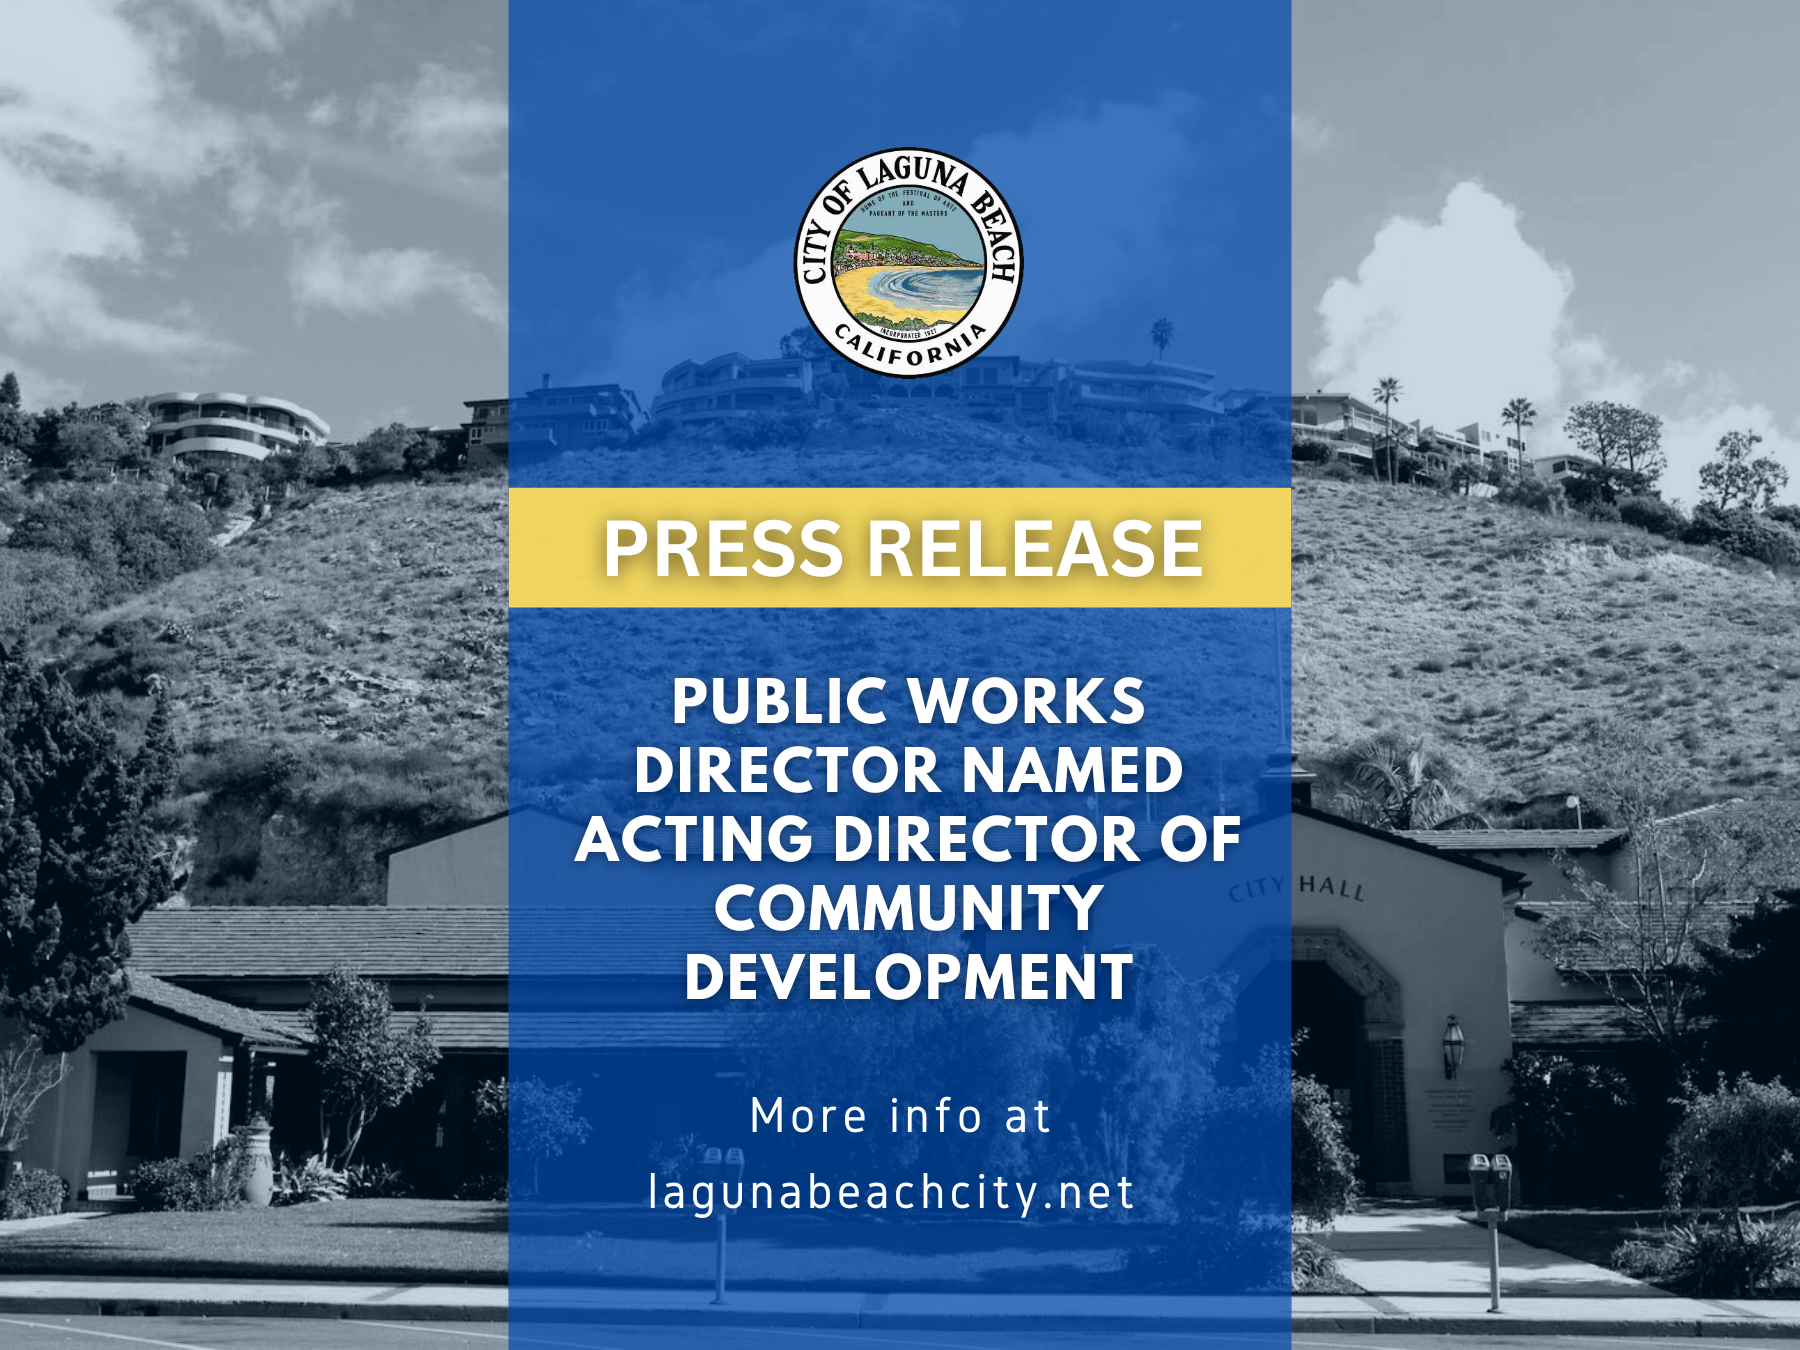 Press Release - Public Works Director Named Acting Director of Community Development